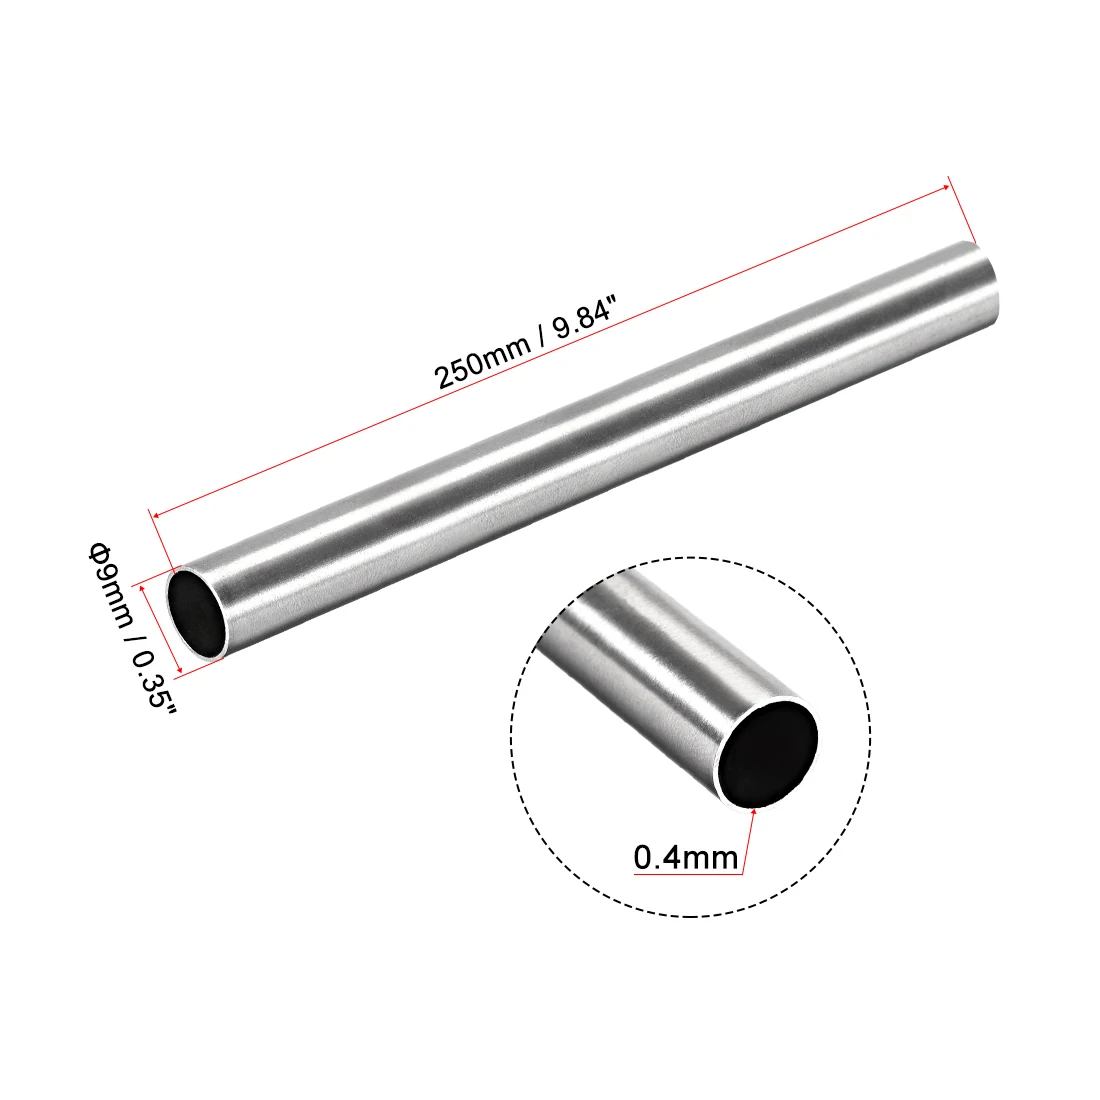 uxcell 304 Stainless Steel Round Tubing 3mm OD 1mm Wall Thickness 250mm Length Seamless Straight Pipe Tube 2 Pcs 